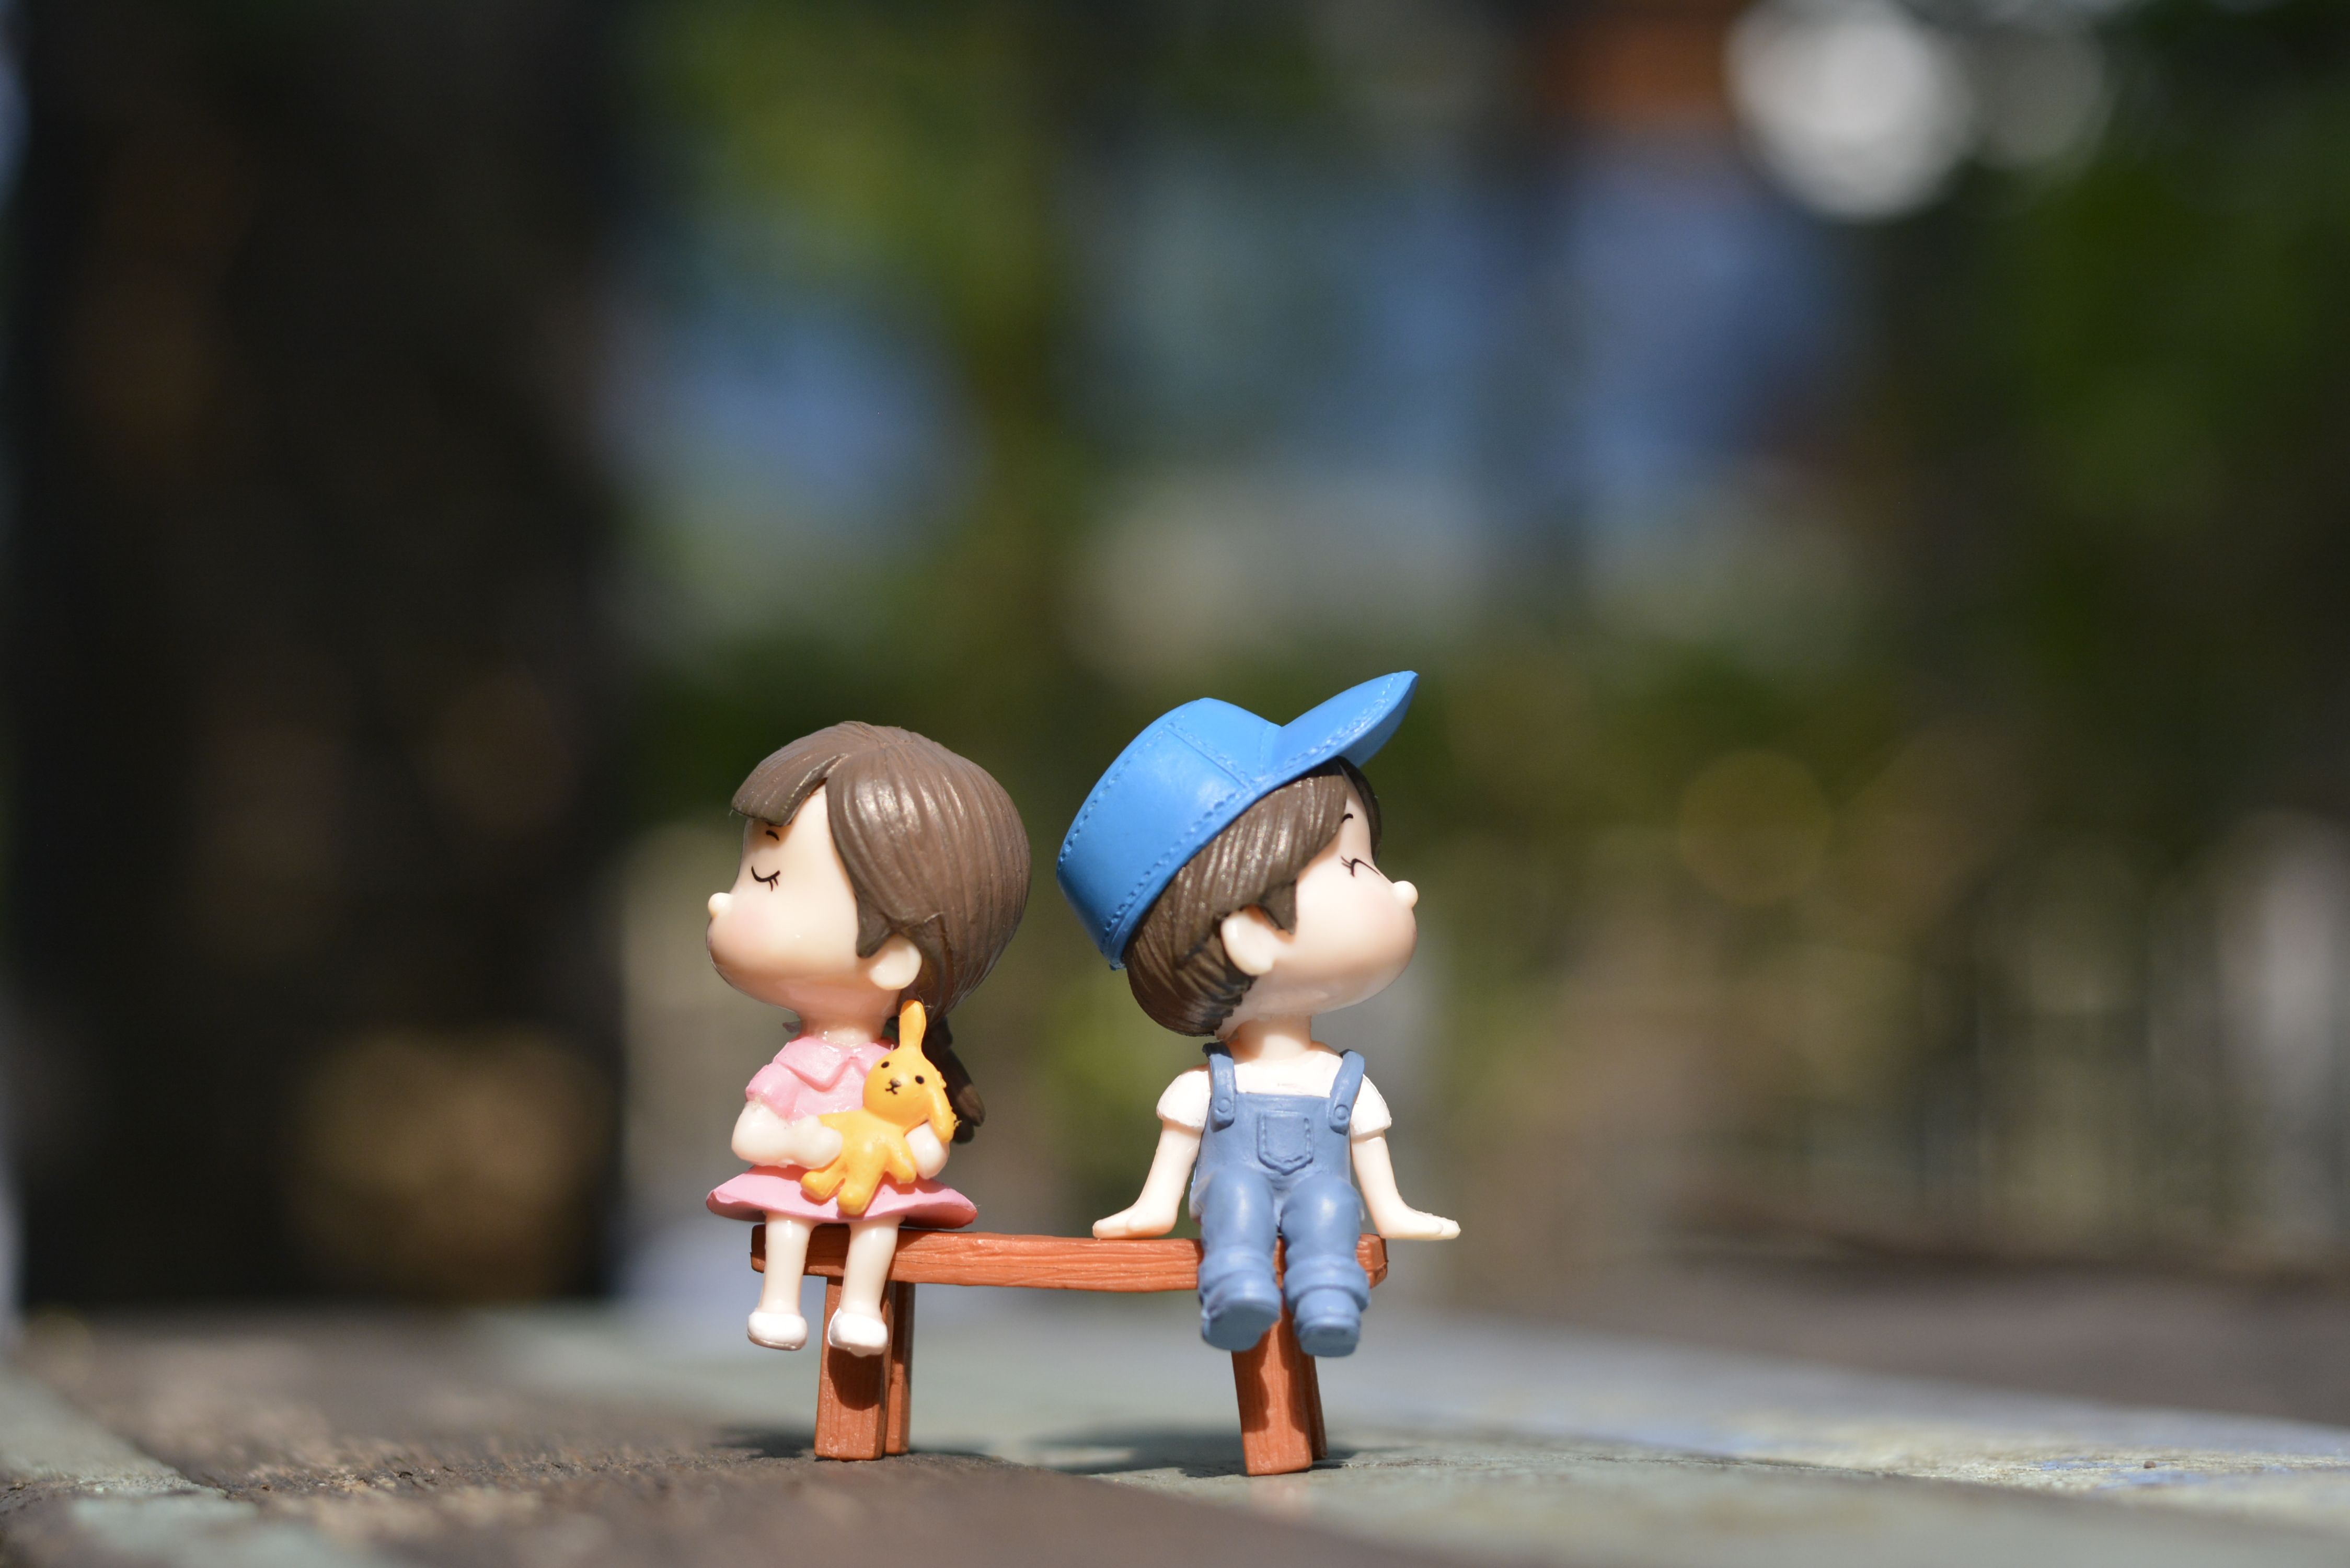 Boy and Girl Sitting on Bench Toy · Free